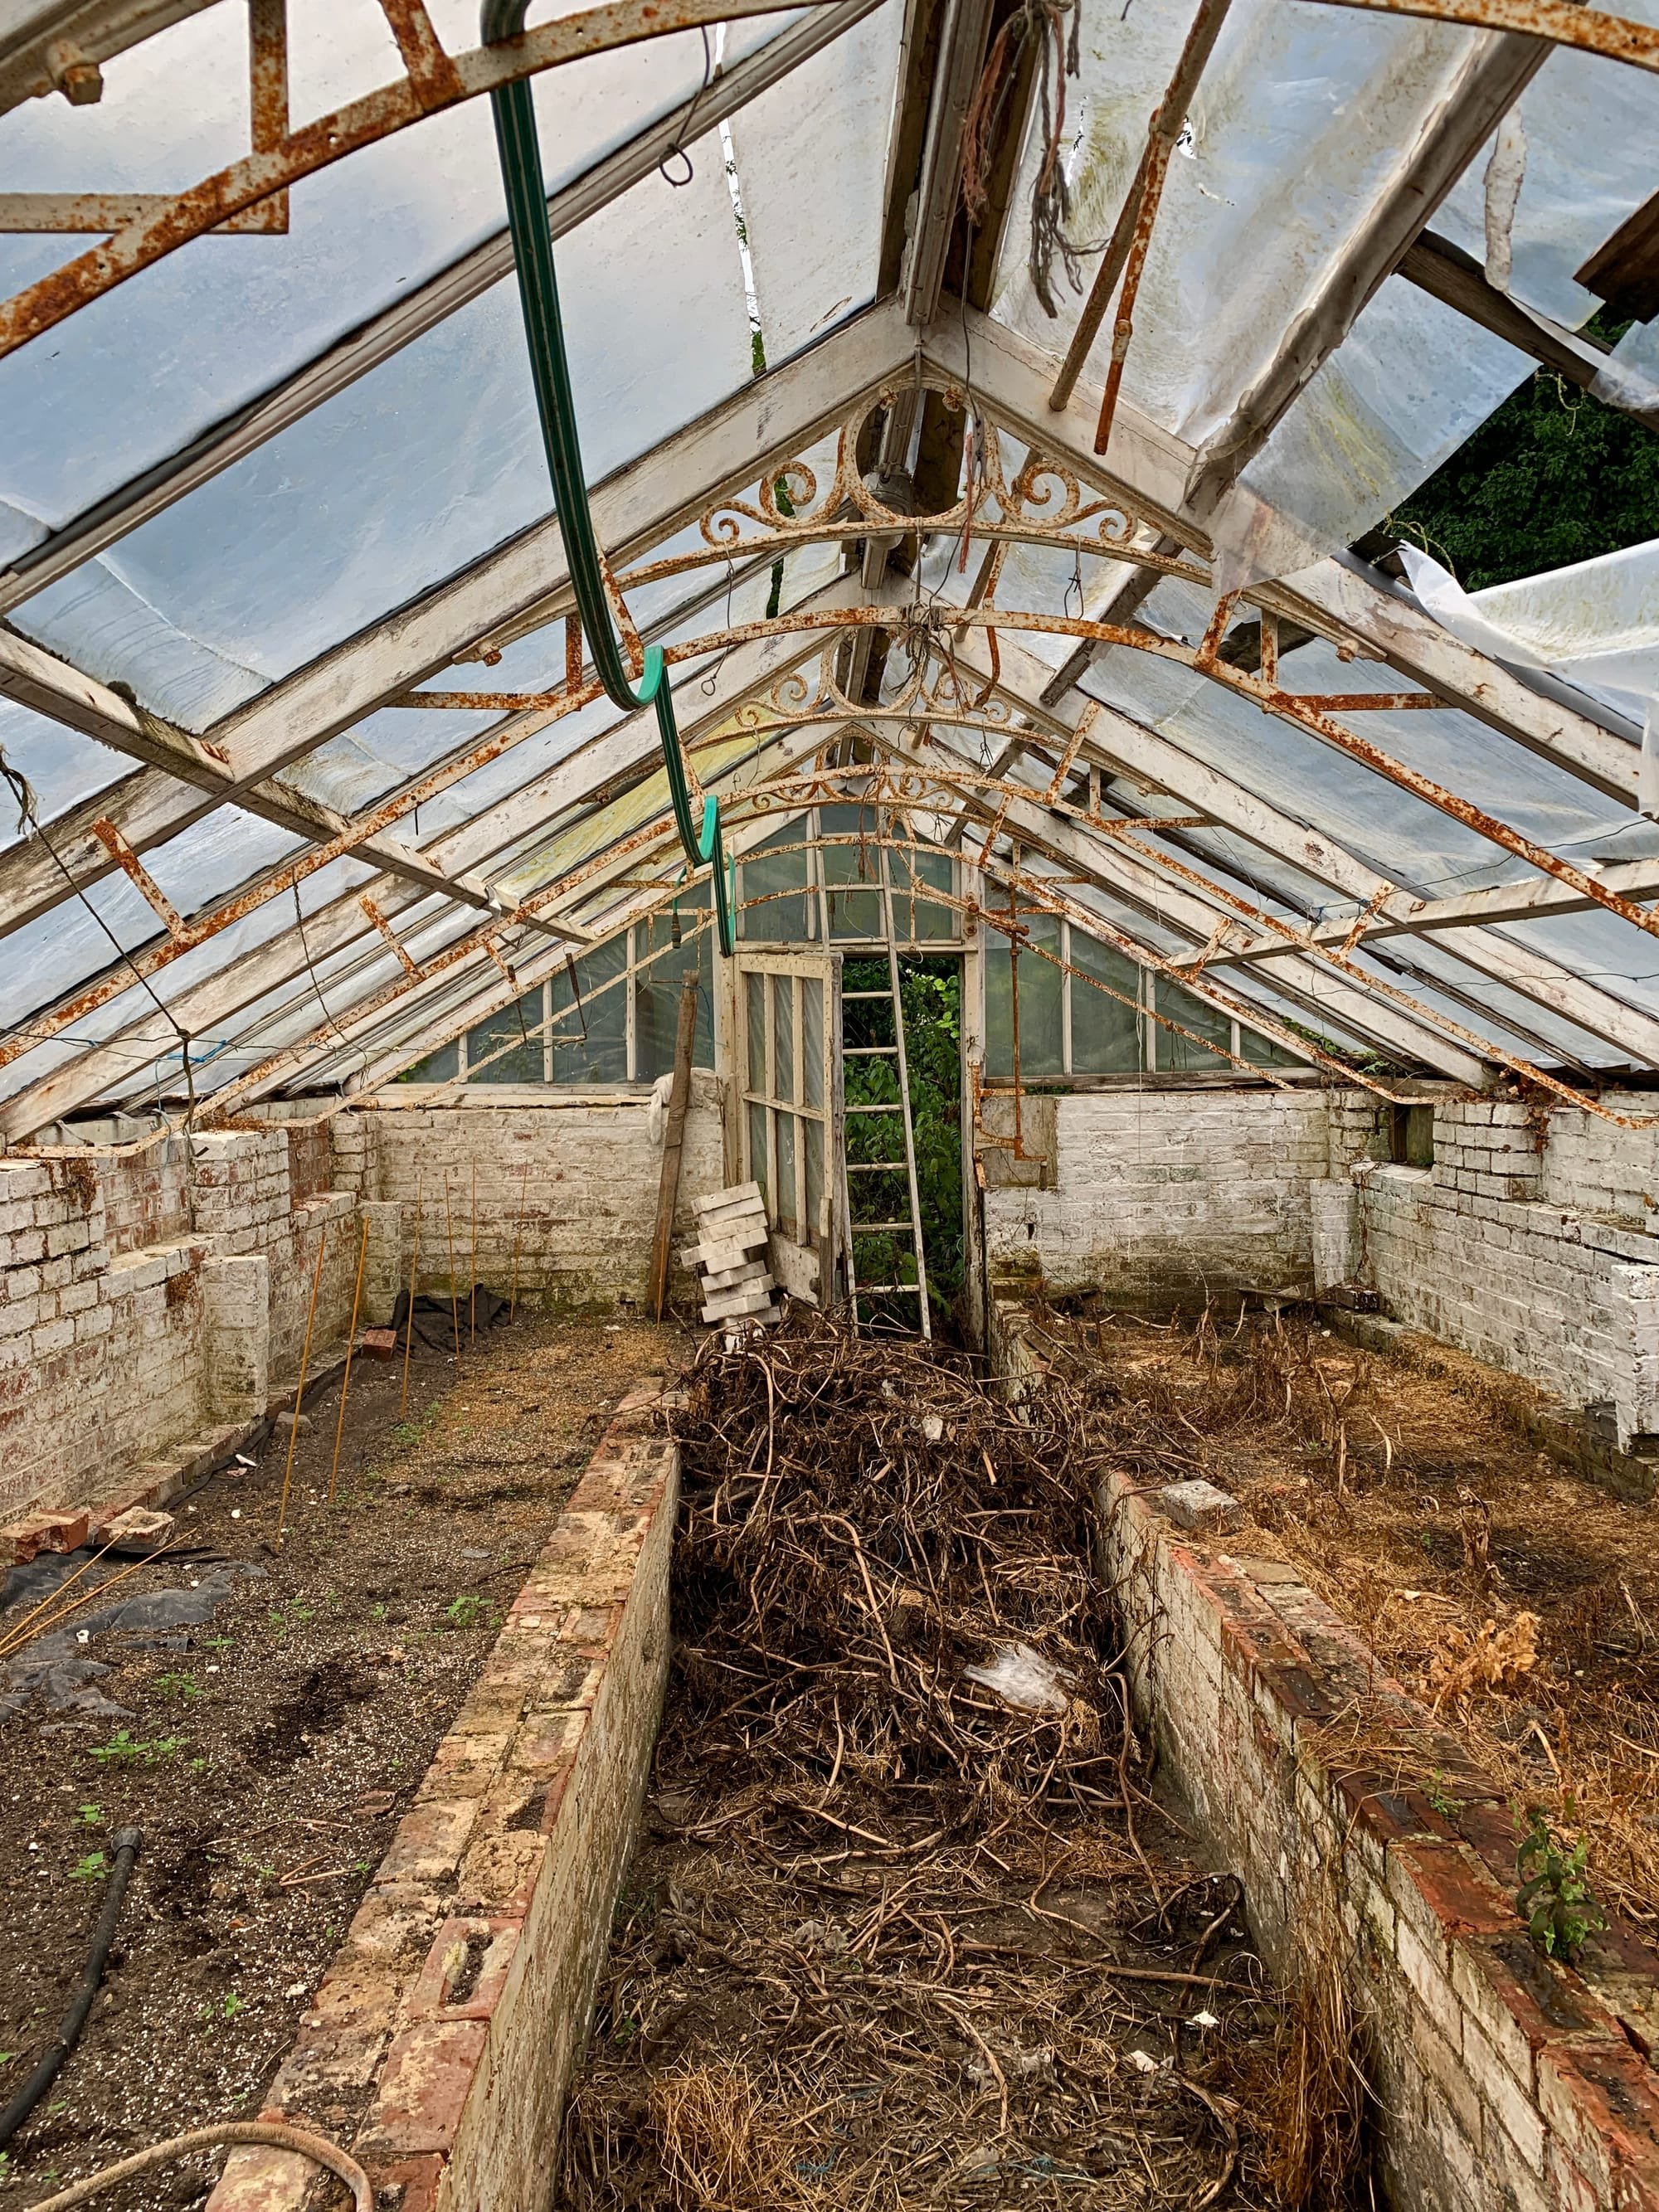 The Derelict Ravilious Greenhouse. Firle, East Sussex